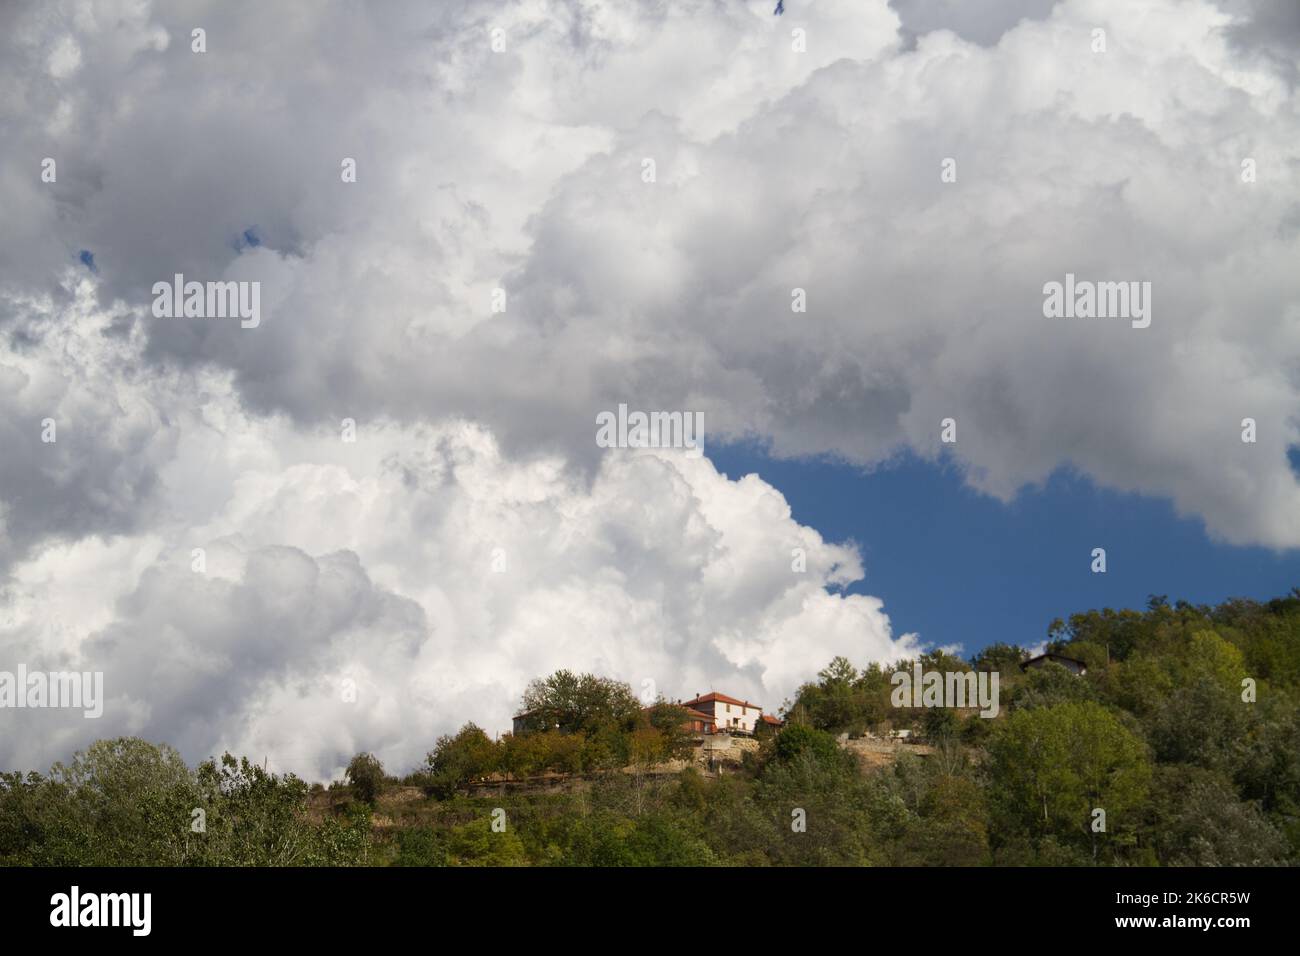 Cumulus clouds, large white clouds, above a village on a wooded hill in Tuscany, Italy Stock Photo